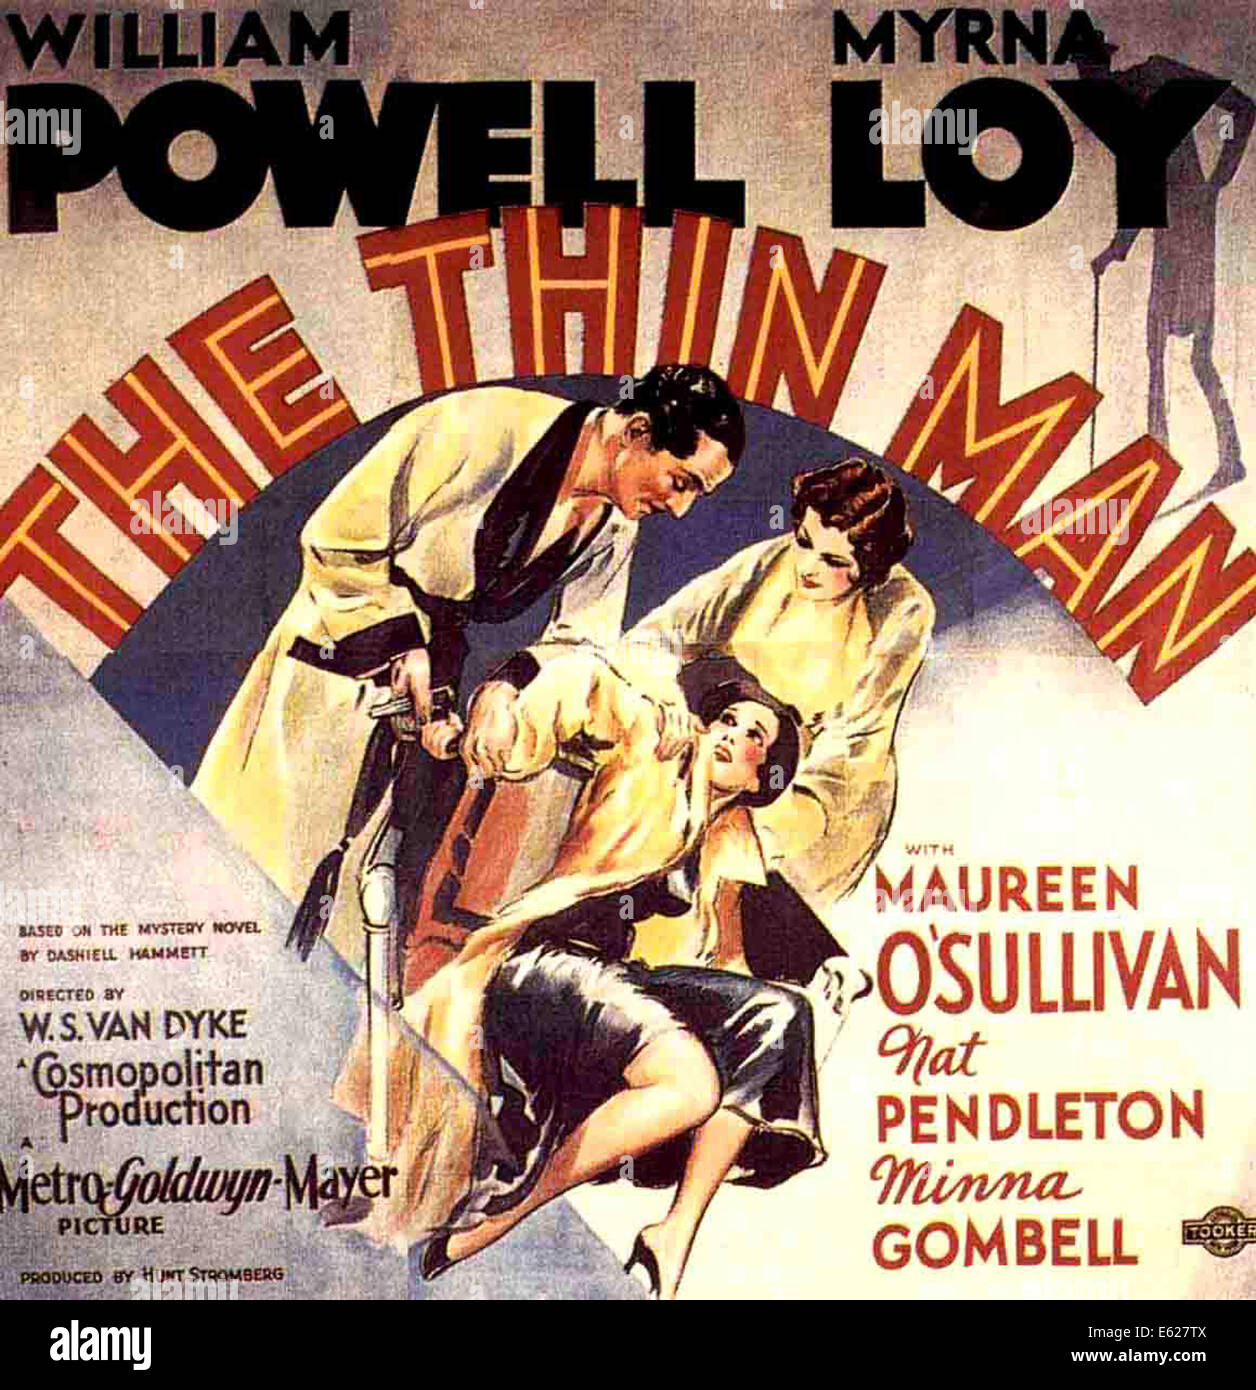 THE THIN MAN - Movie Poster - Directed by W.S. Van Dyke - MGM 1934 Stock Photo